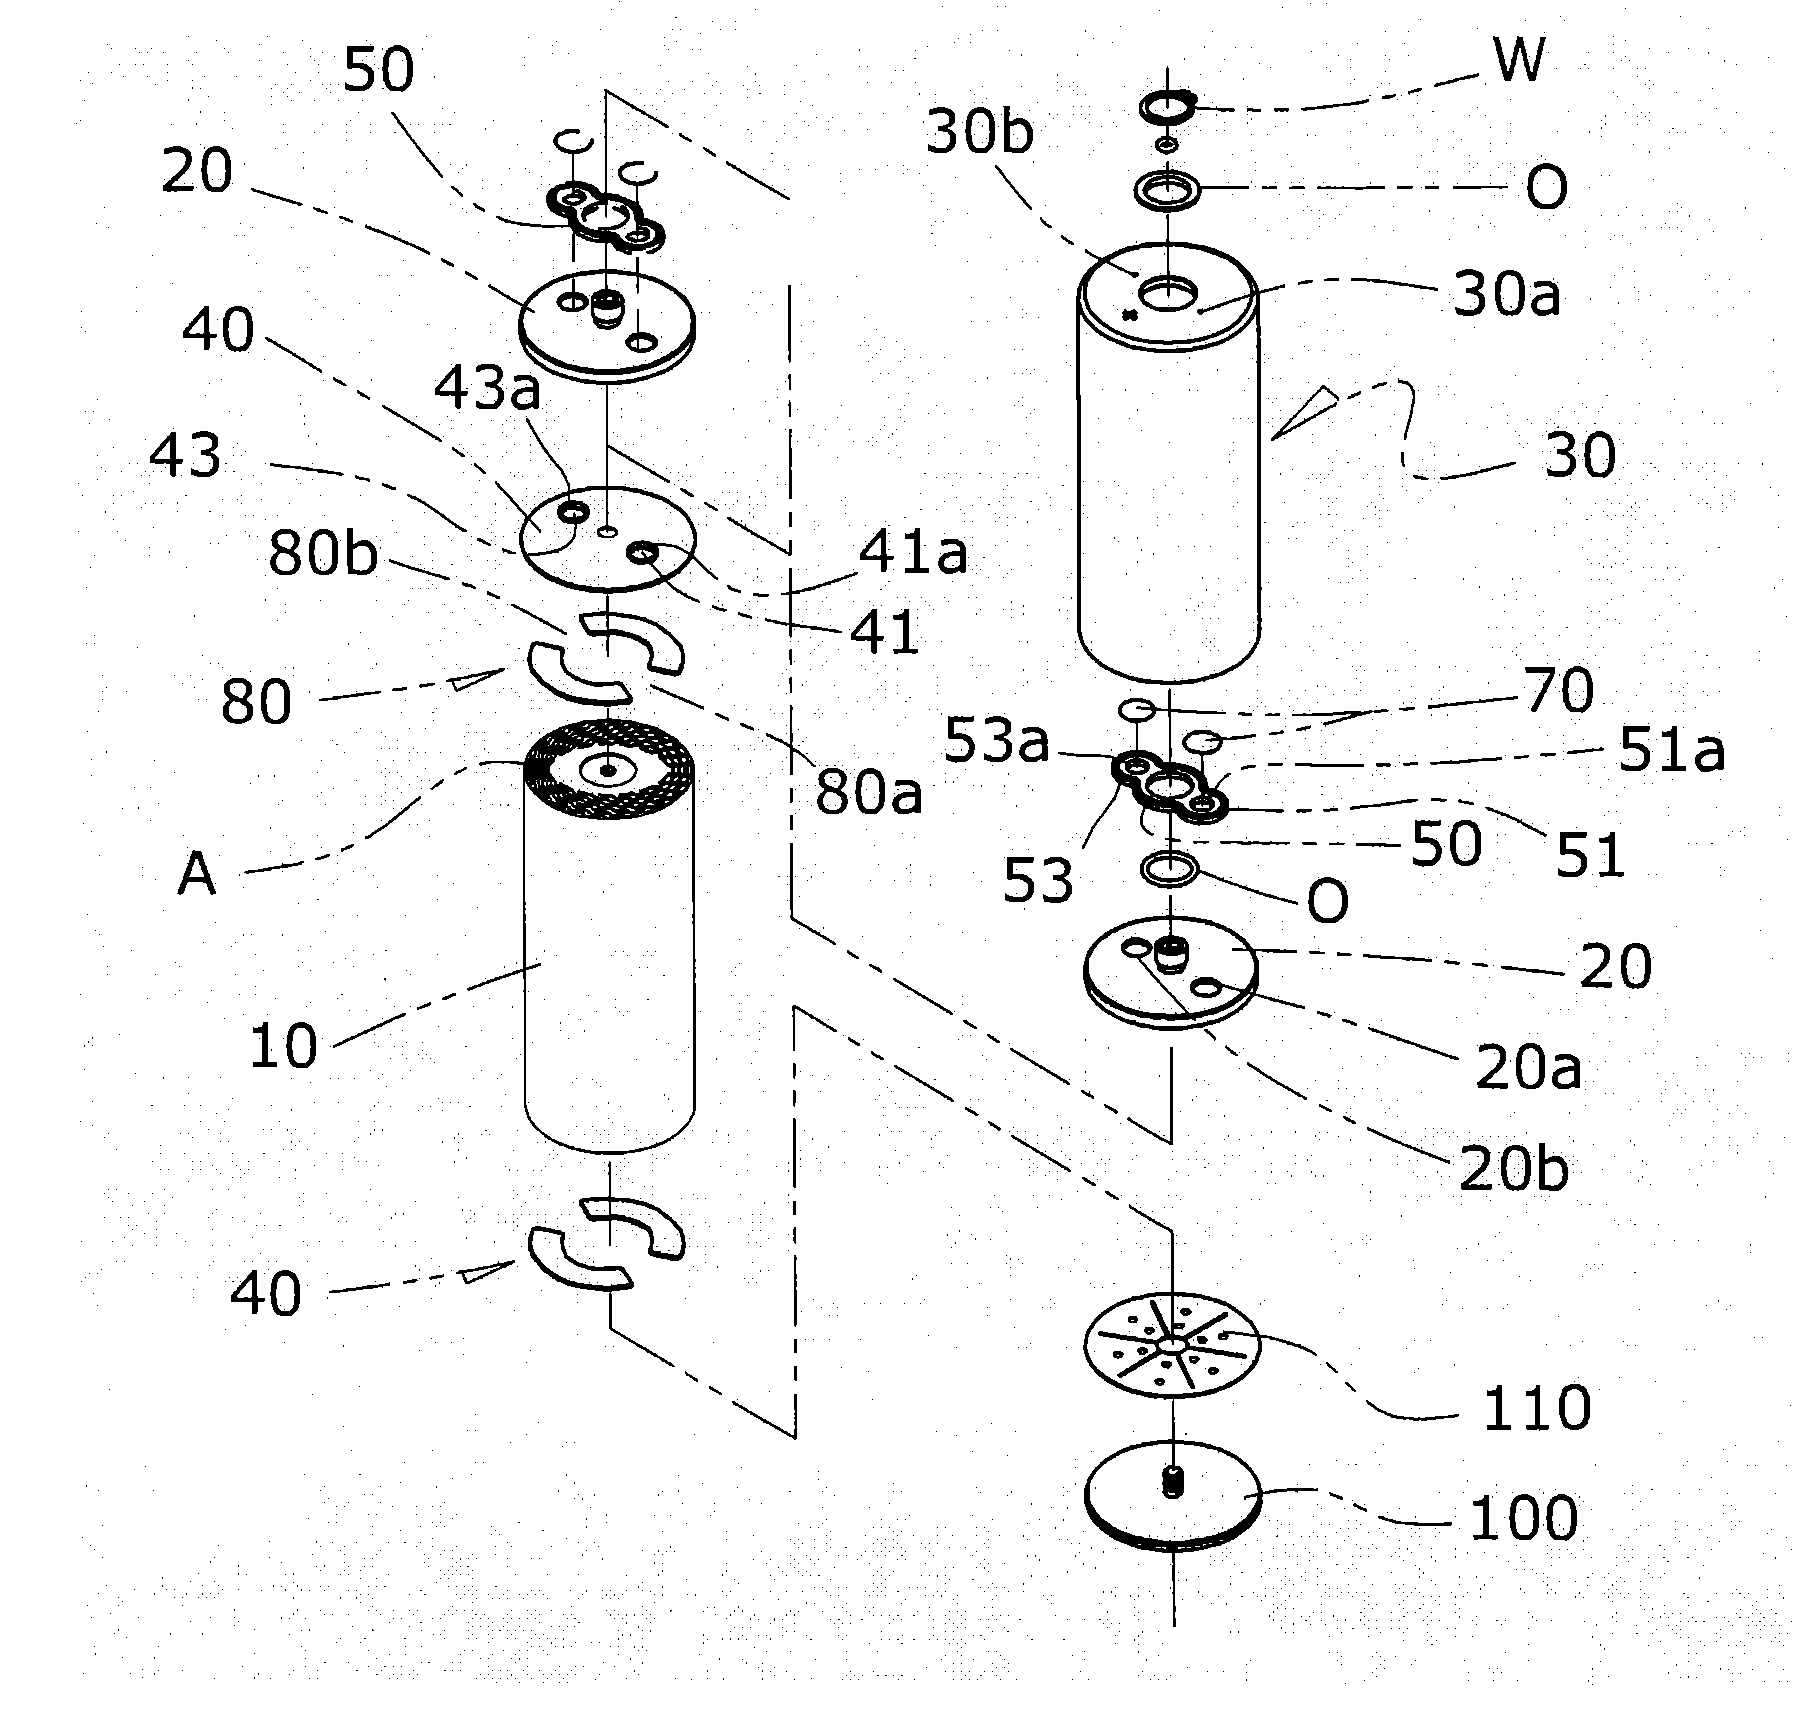 Electrical energy storage device